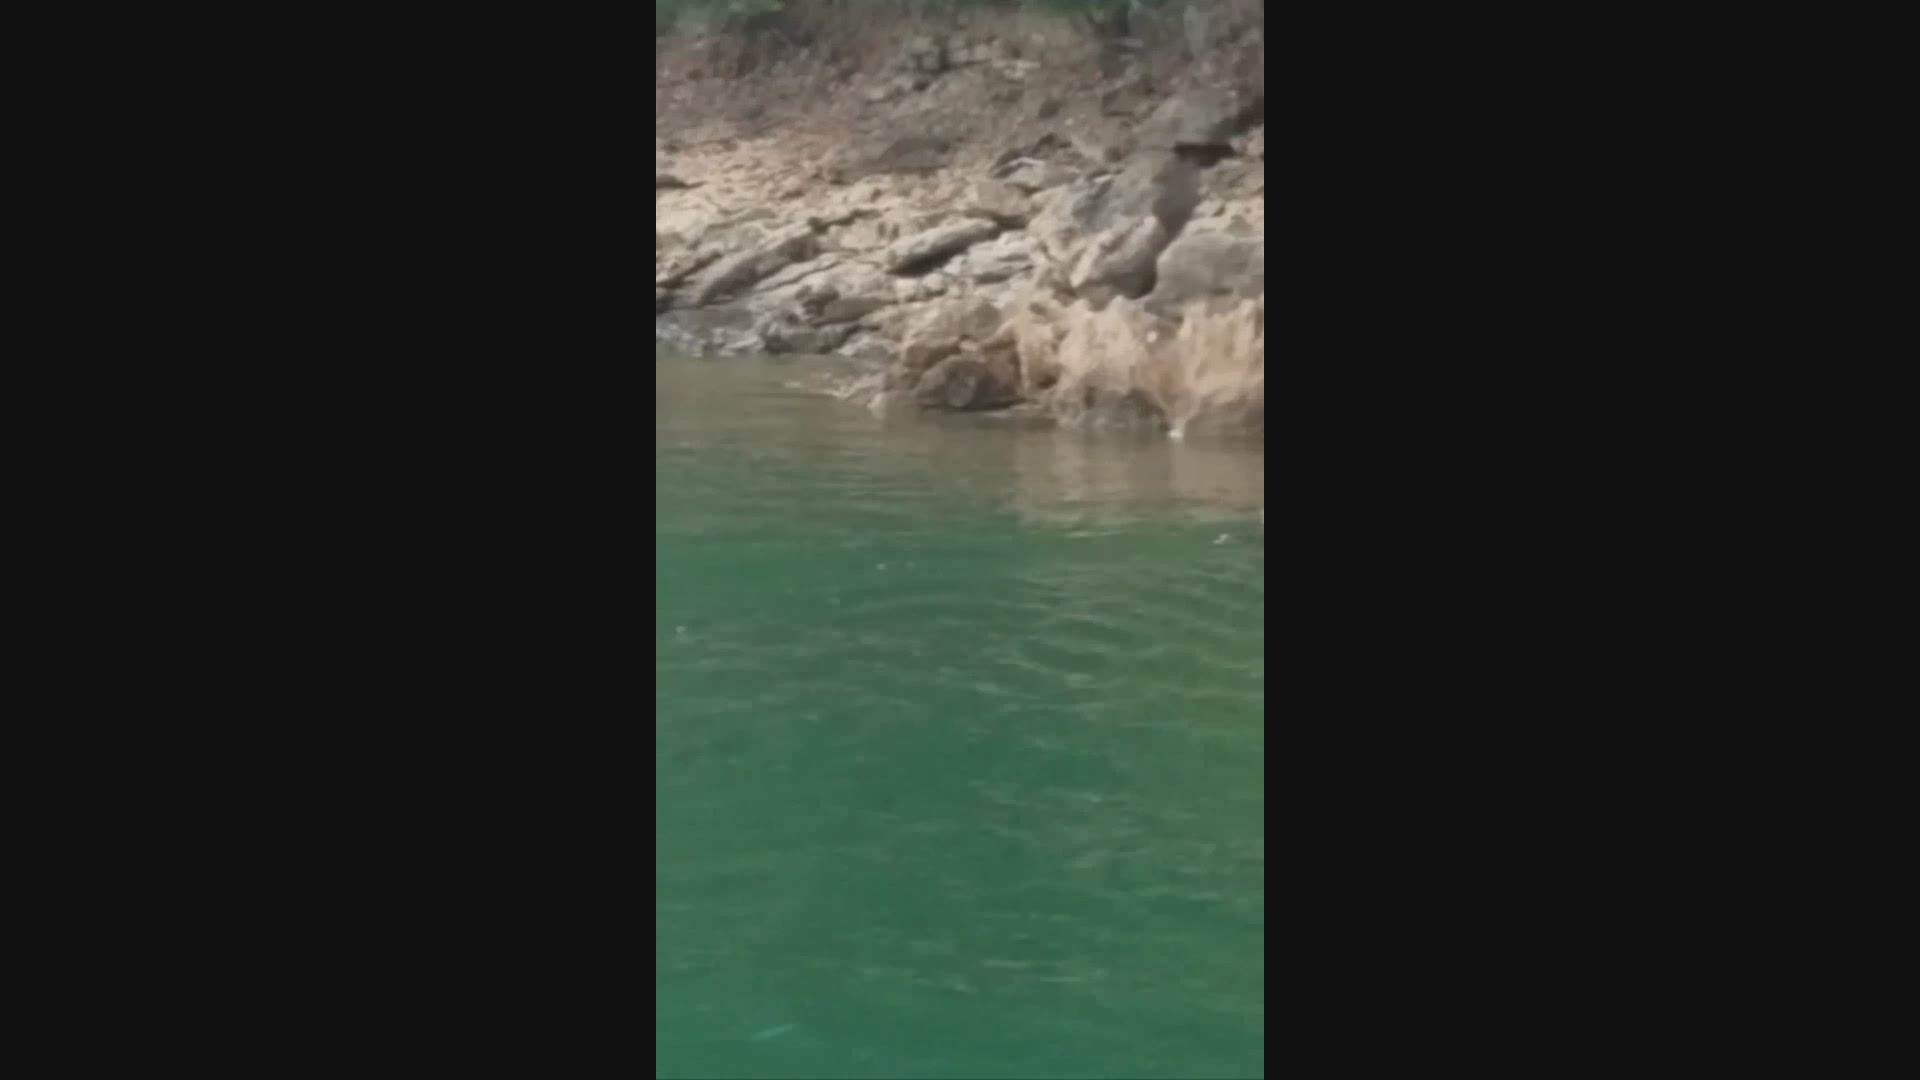 The Morrow family was out on the water for a rare October lake day in East Tennessee when they spotted the wild cat swimming across the lake. Video courtesy: Jodi Morrow